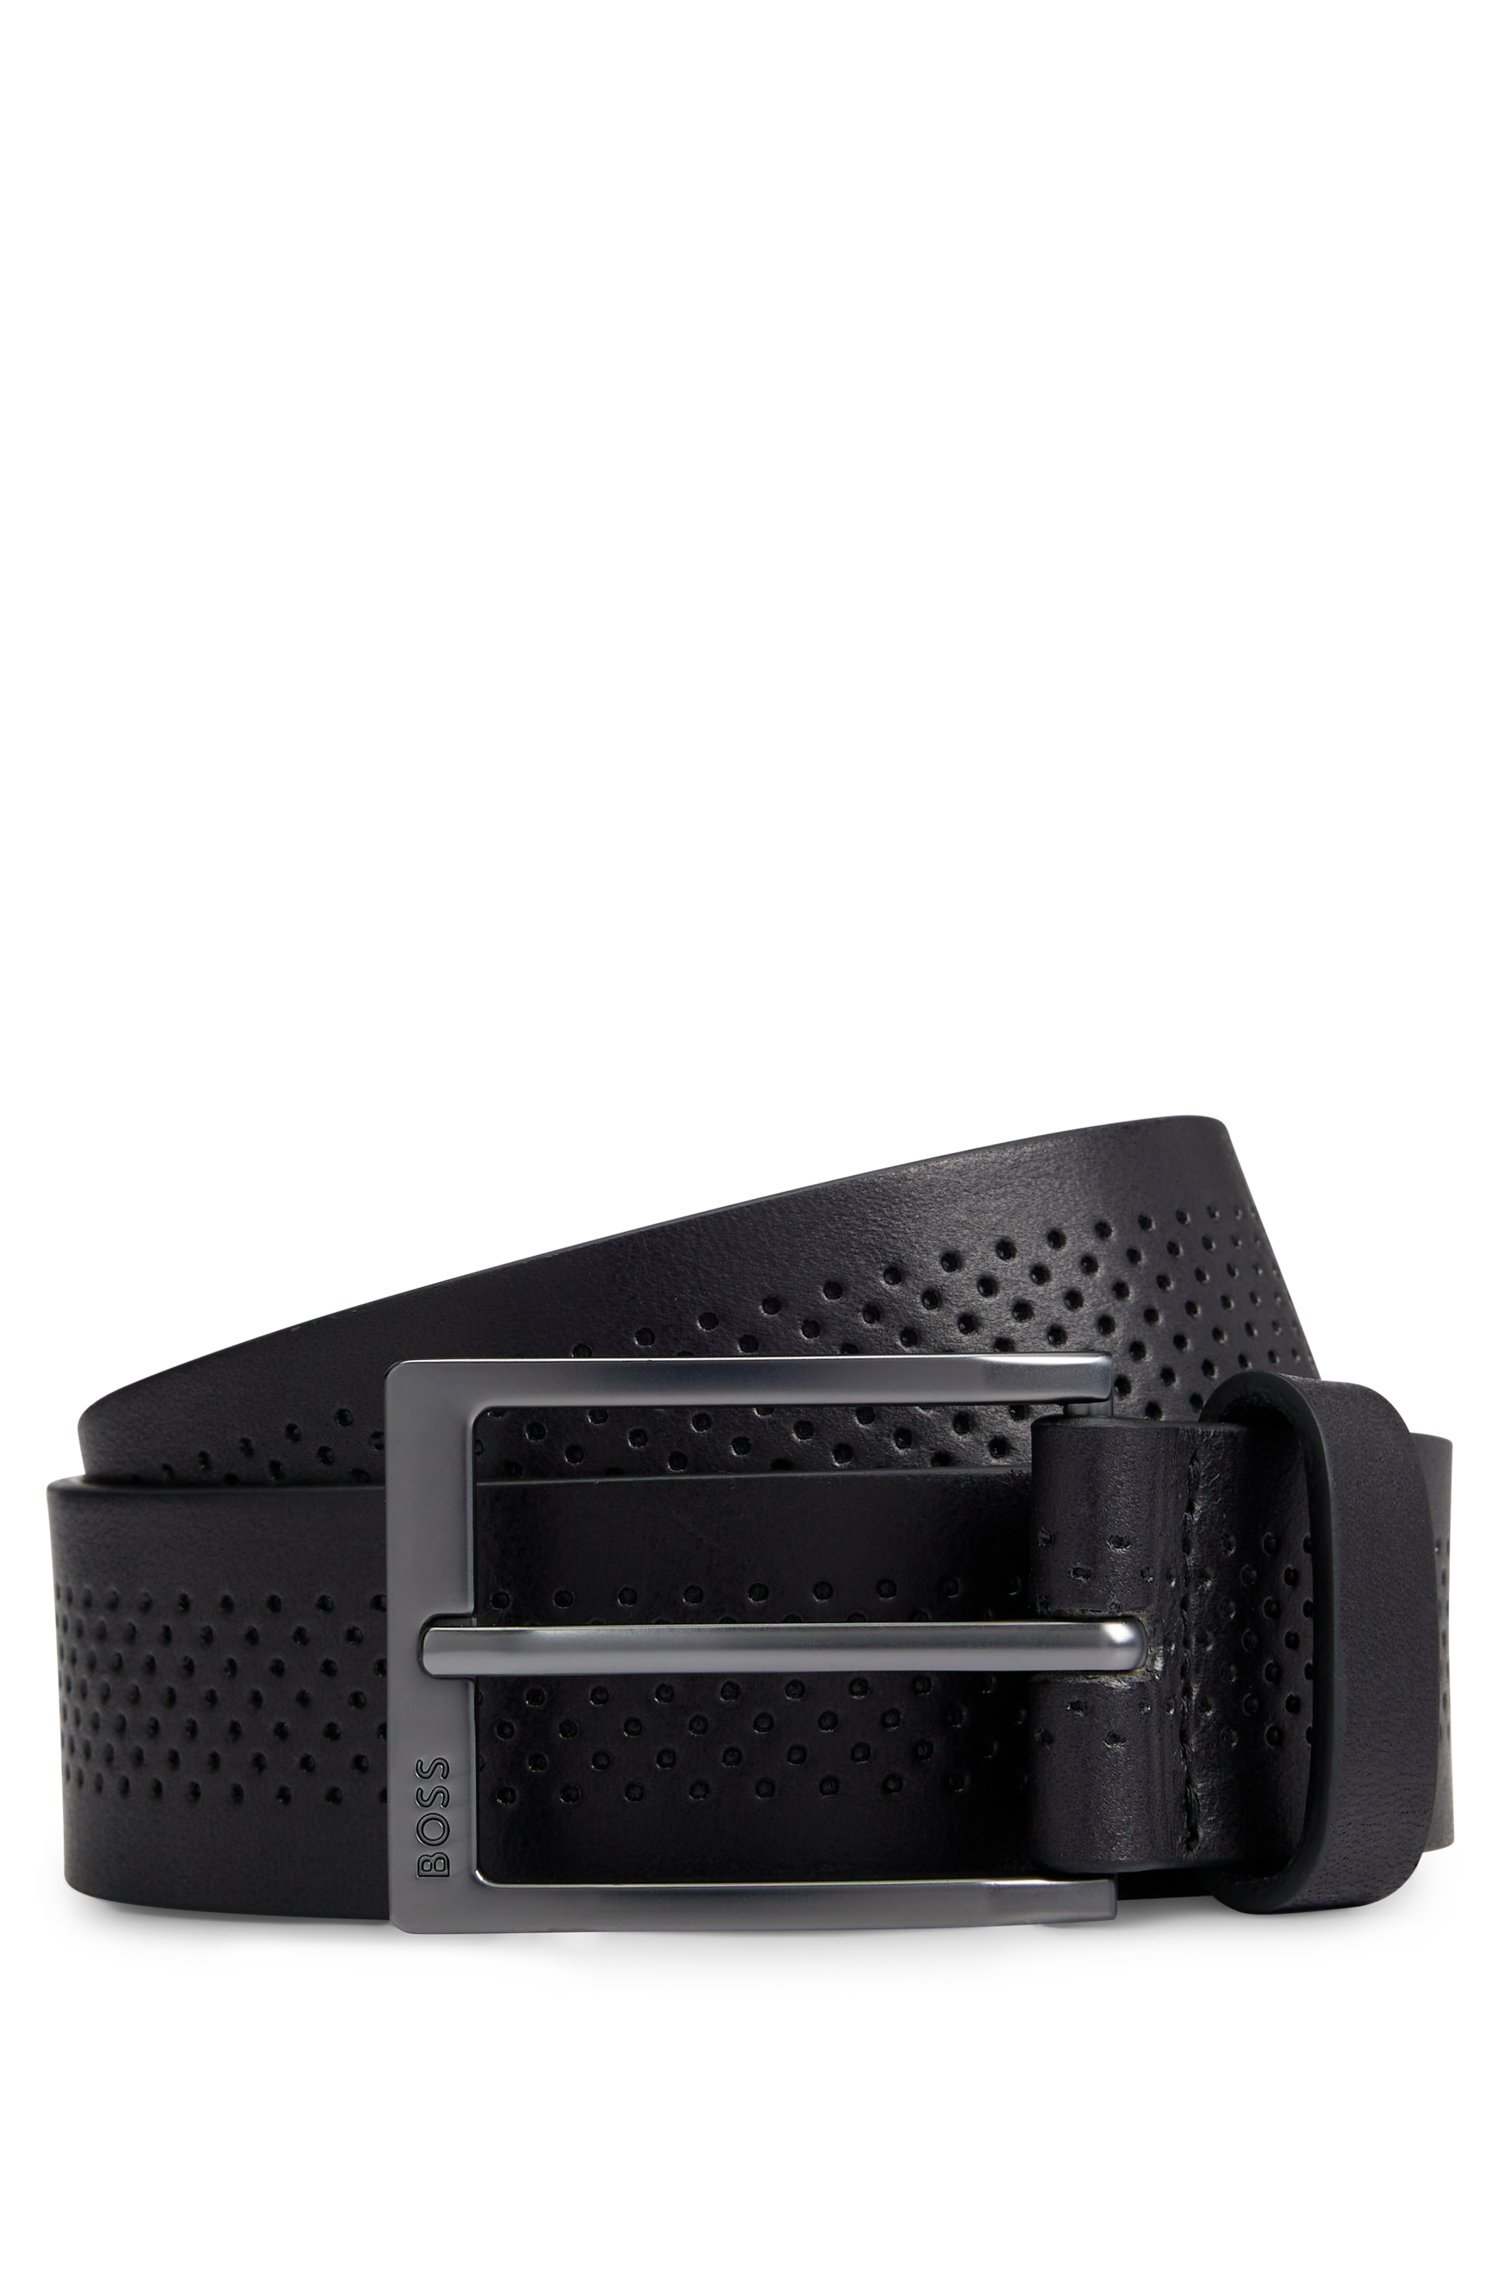 Italian-leather belt with perforated strap and gunmetal buckle